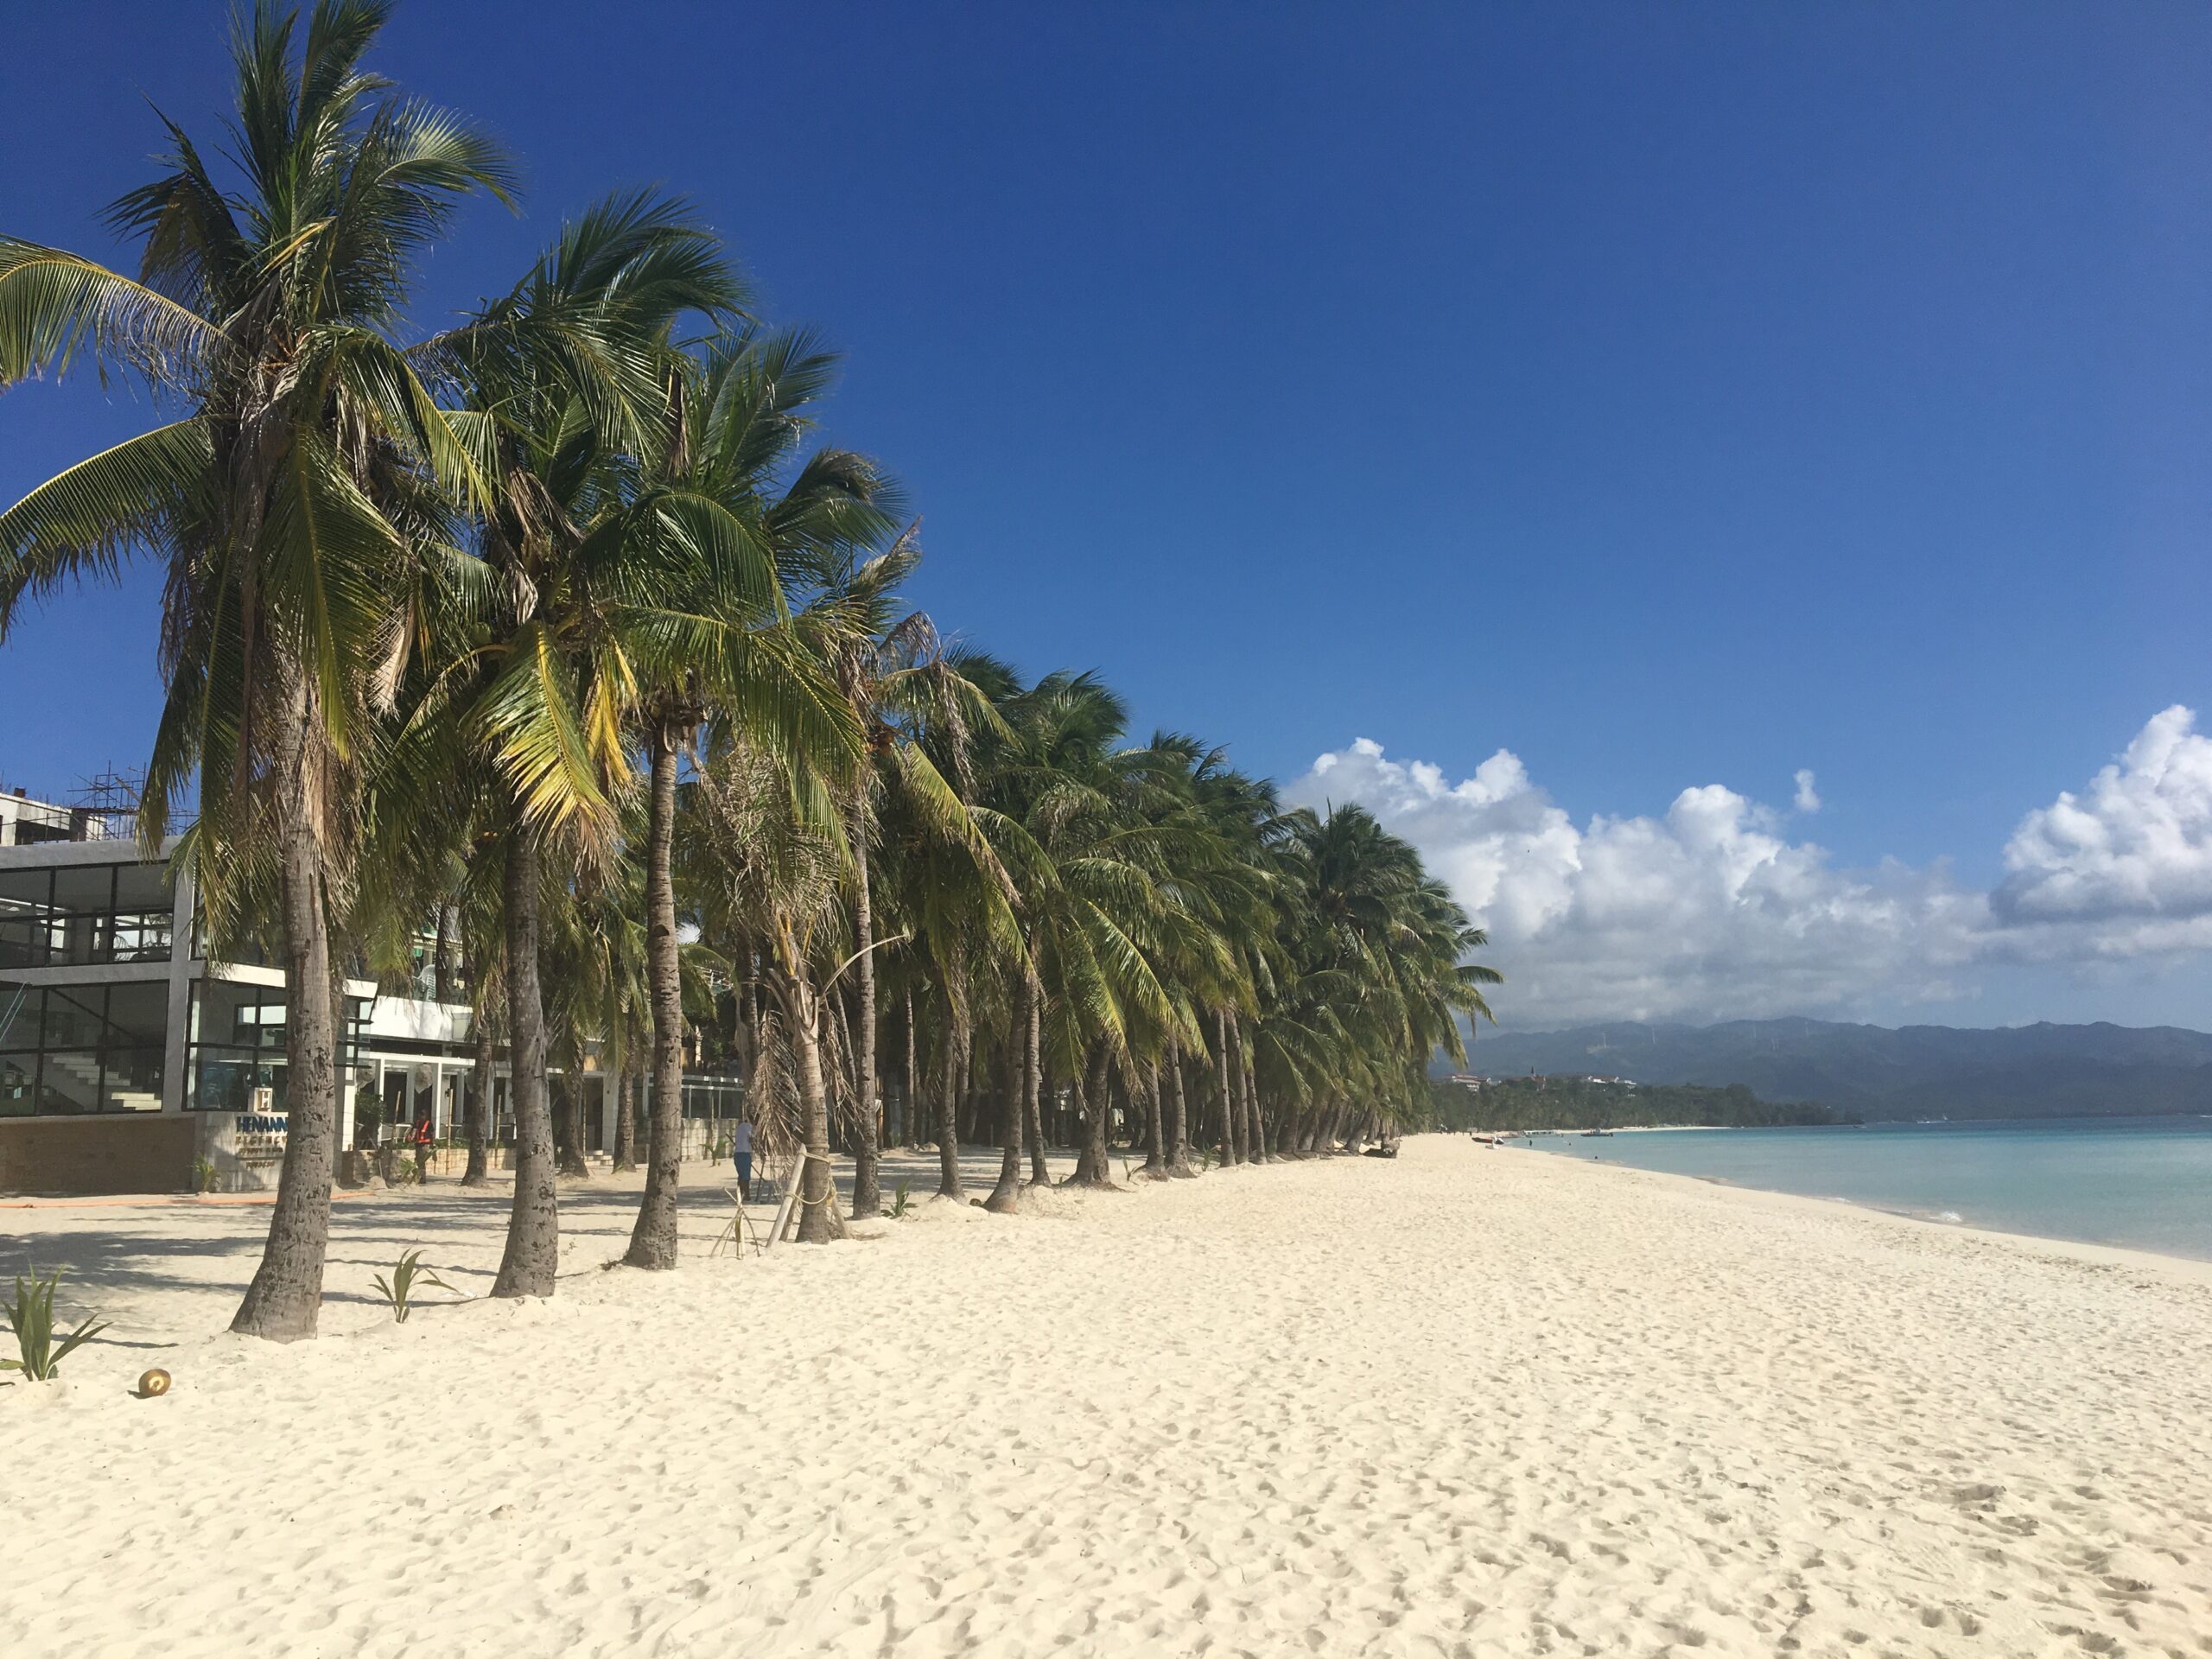 Philippine tourism’s GDP share falls in 2020